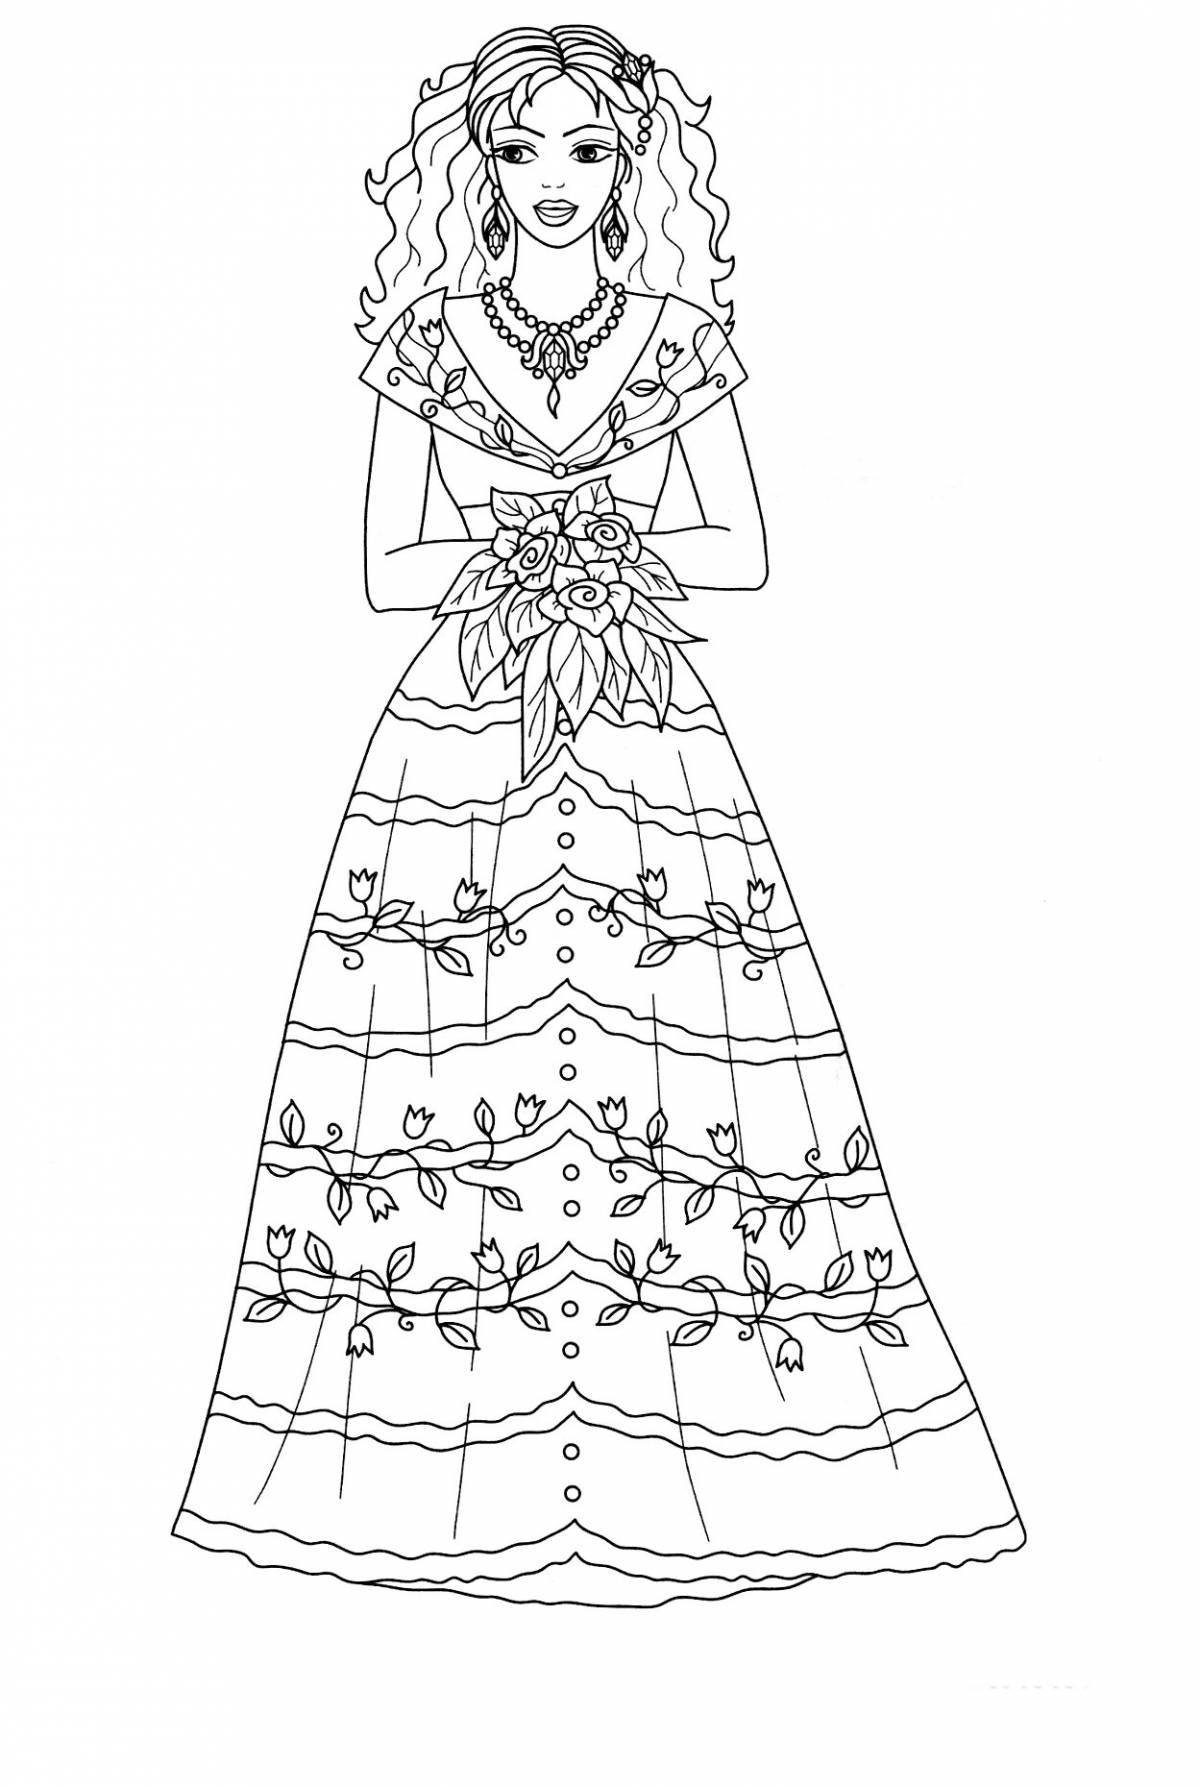 Gorgeous coloring book for girls princesses in beautiful dresses